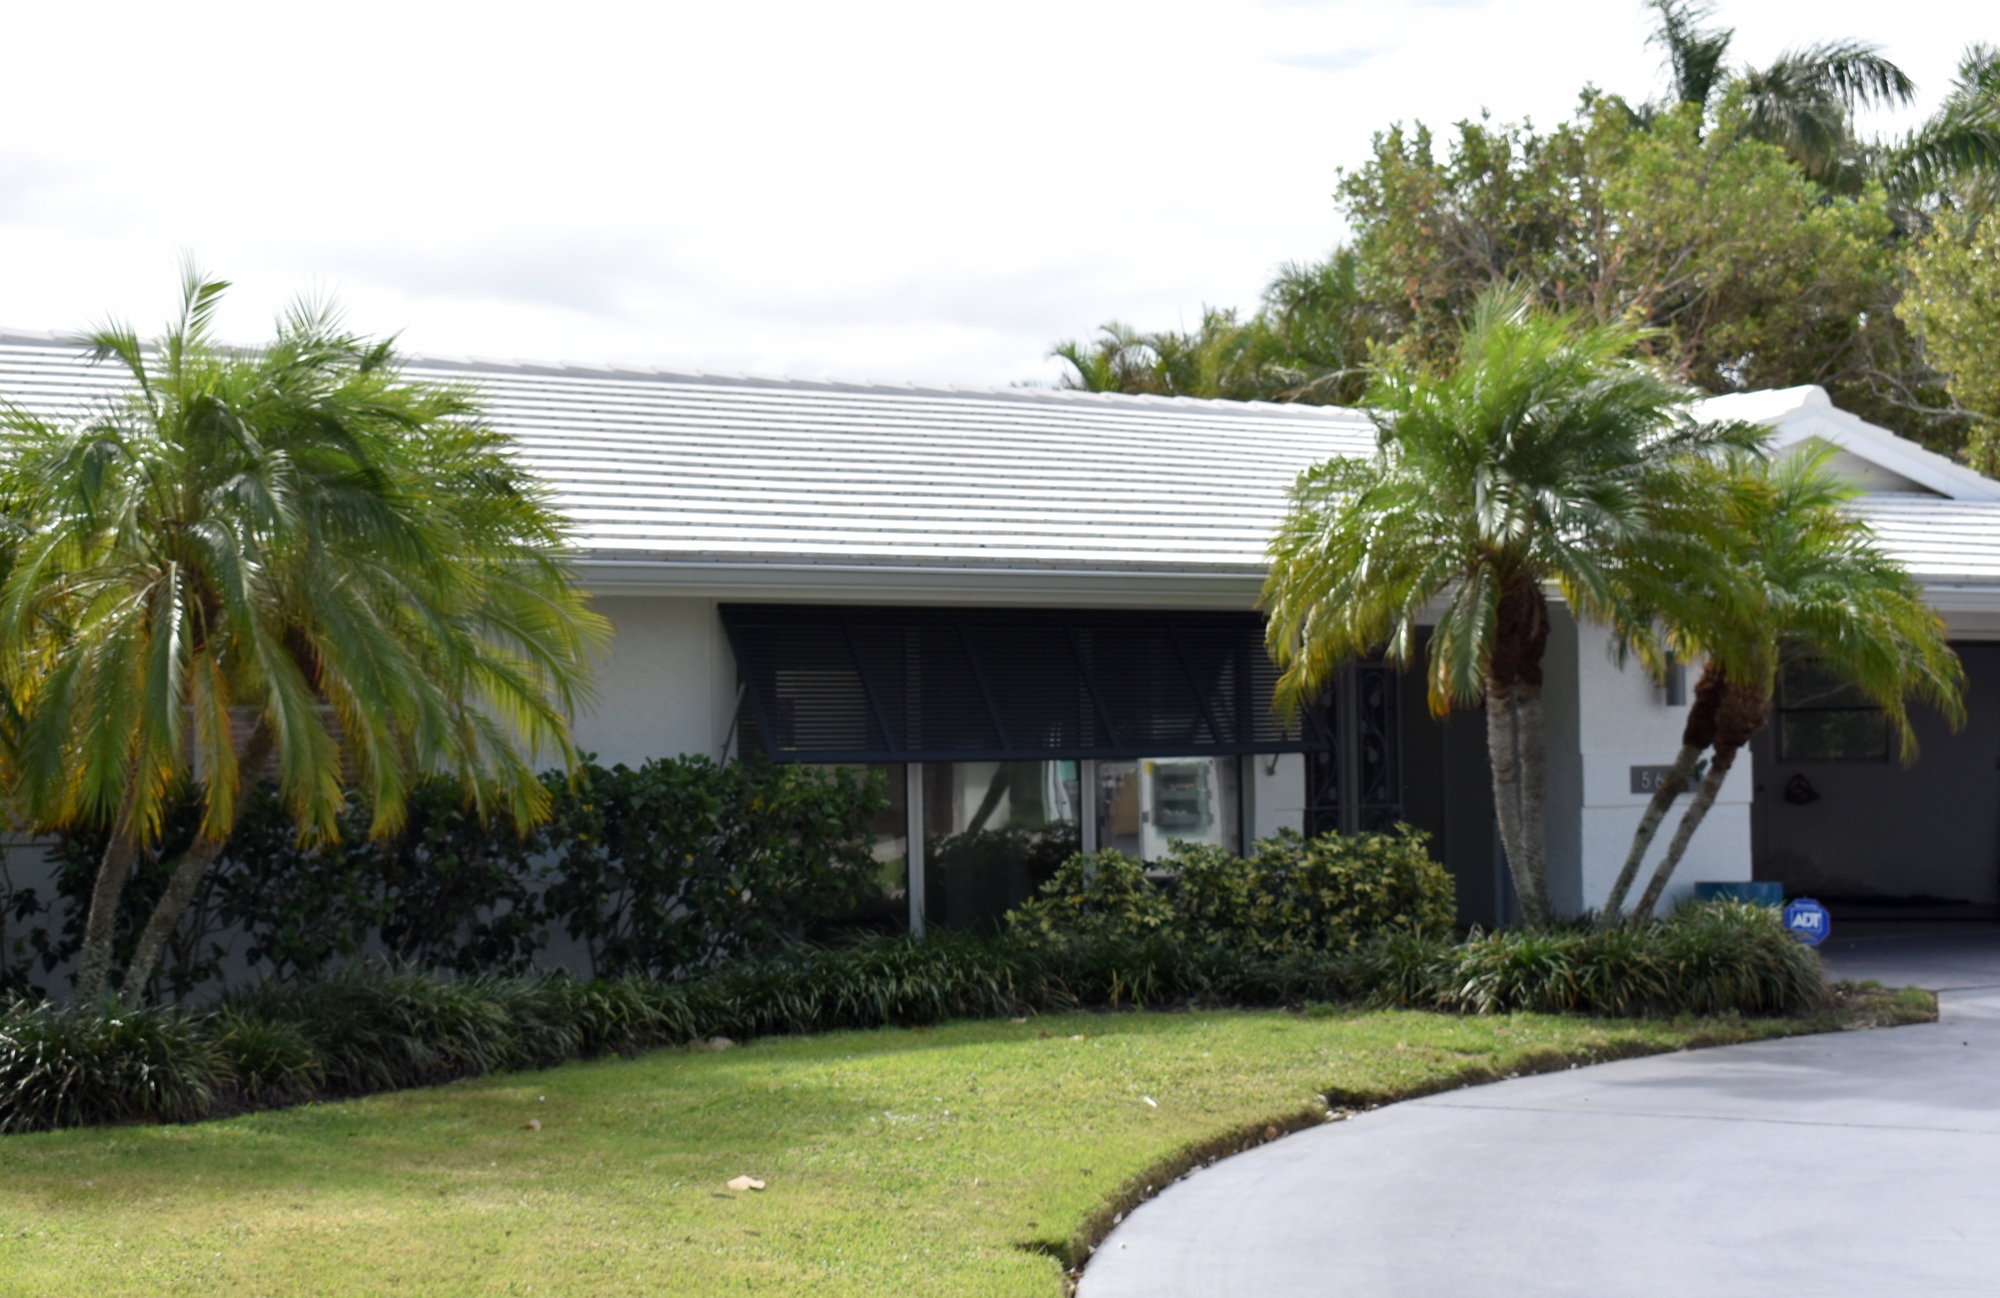 Built in 1964, the home at 567 Bird Key Drive has three bedrooms, two baths, a pool and 2,414 square feet of living area. (Eric Garwood)